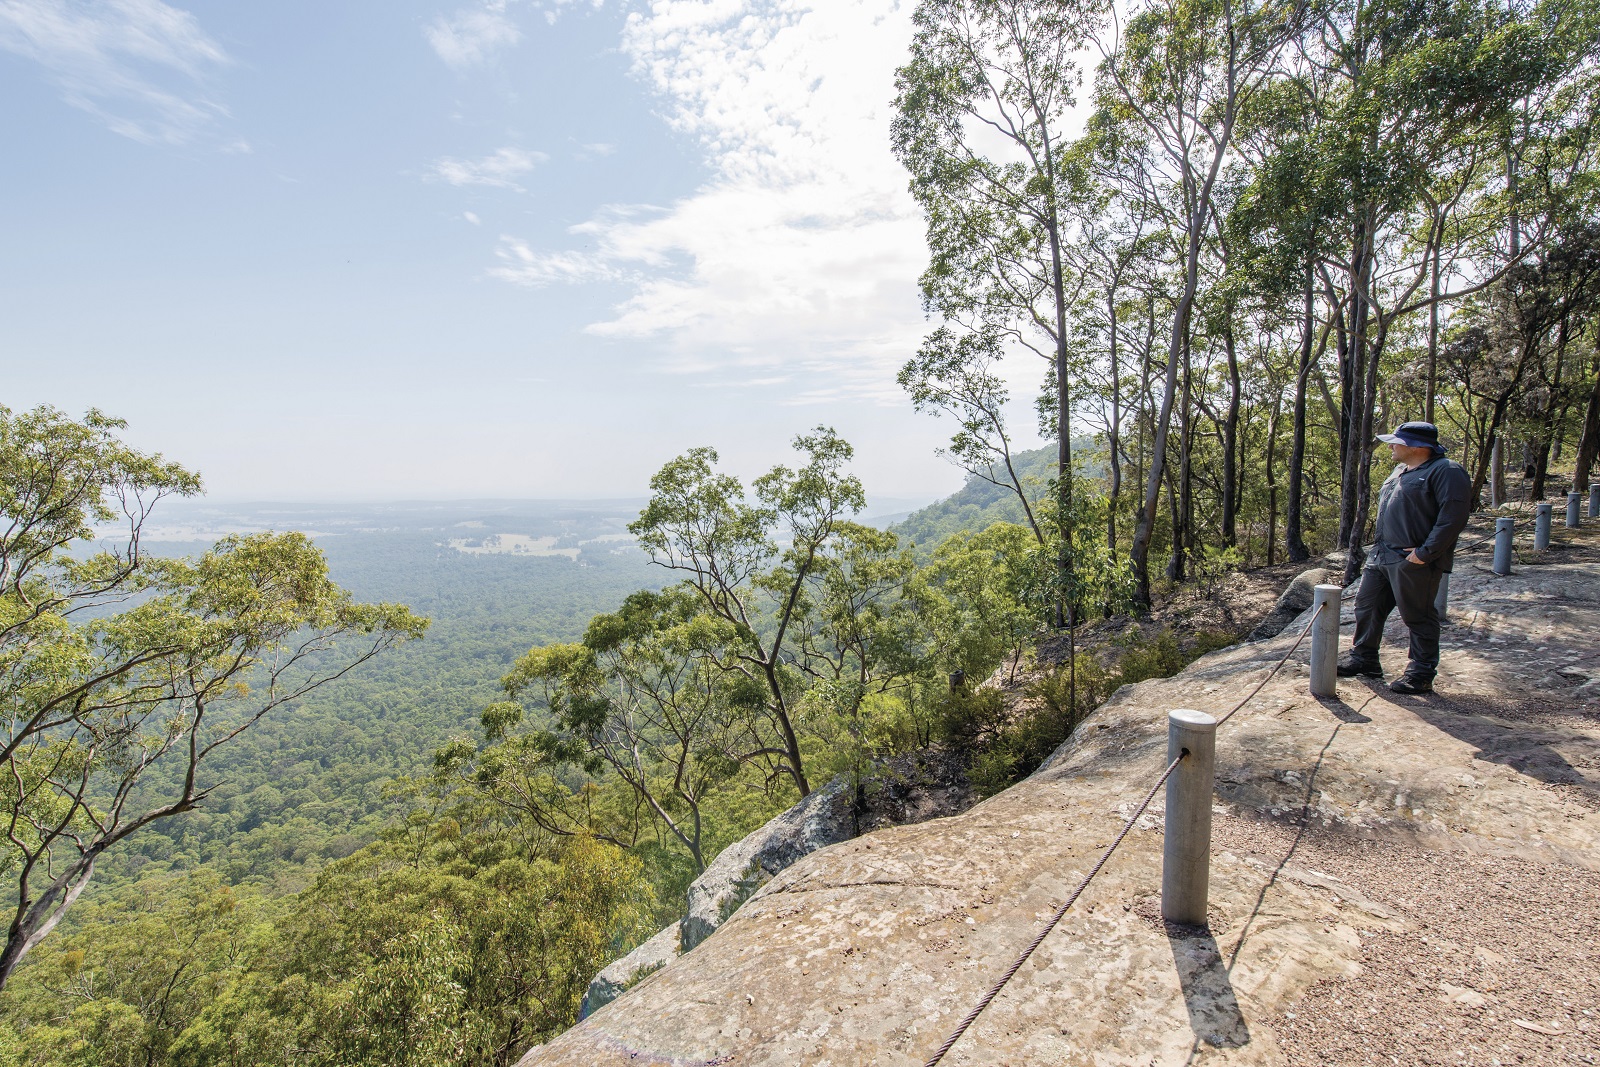 The Narrow Place lookout in Watagans National Park. Photo credit: John Spencer/DPIE